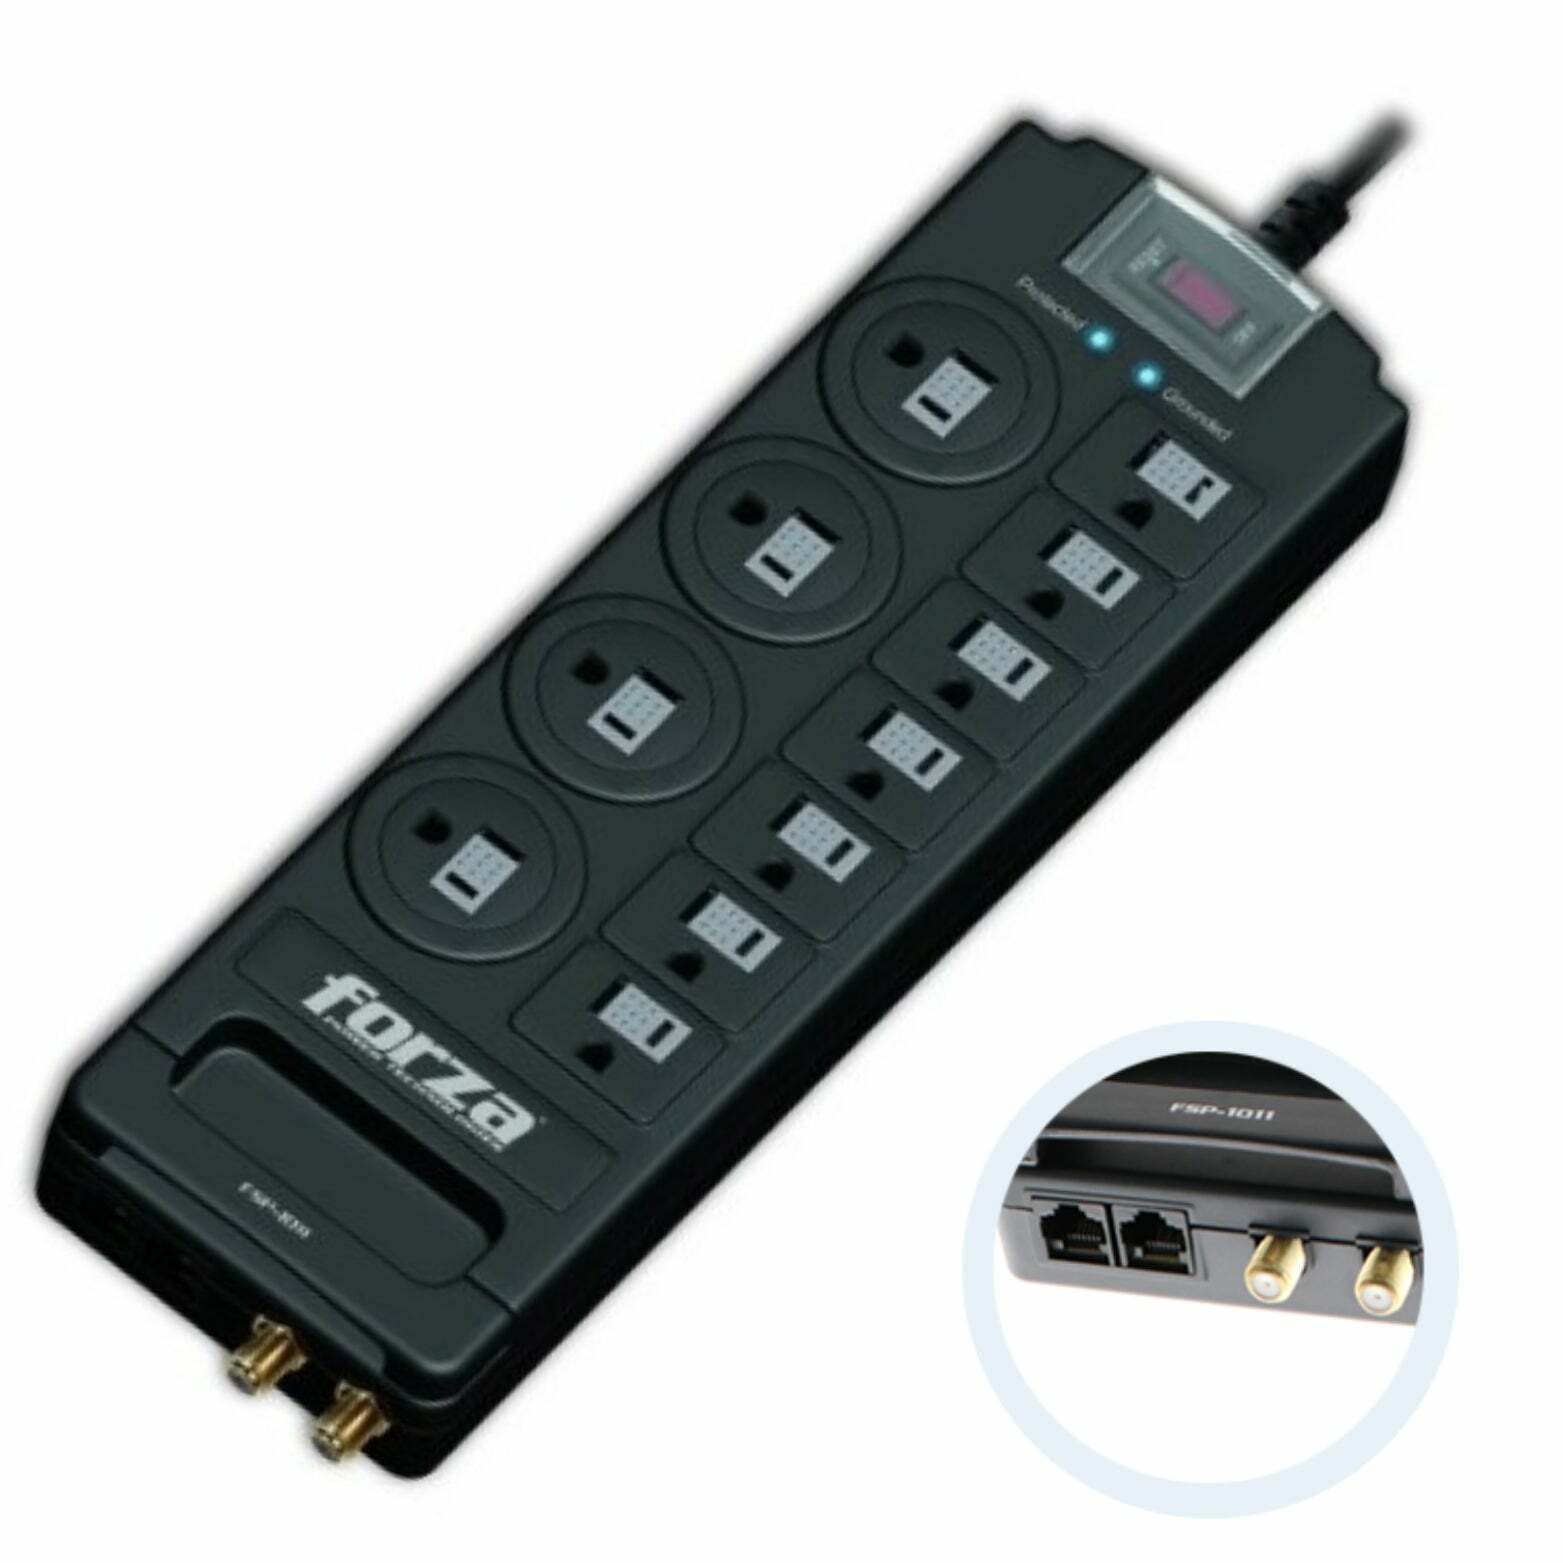 Forza Power Technologies - Surge Protector 1800J/1750W, 11 Outlets 120V/220V